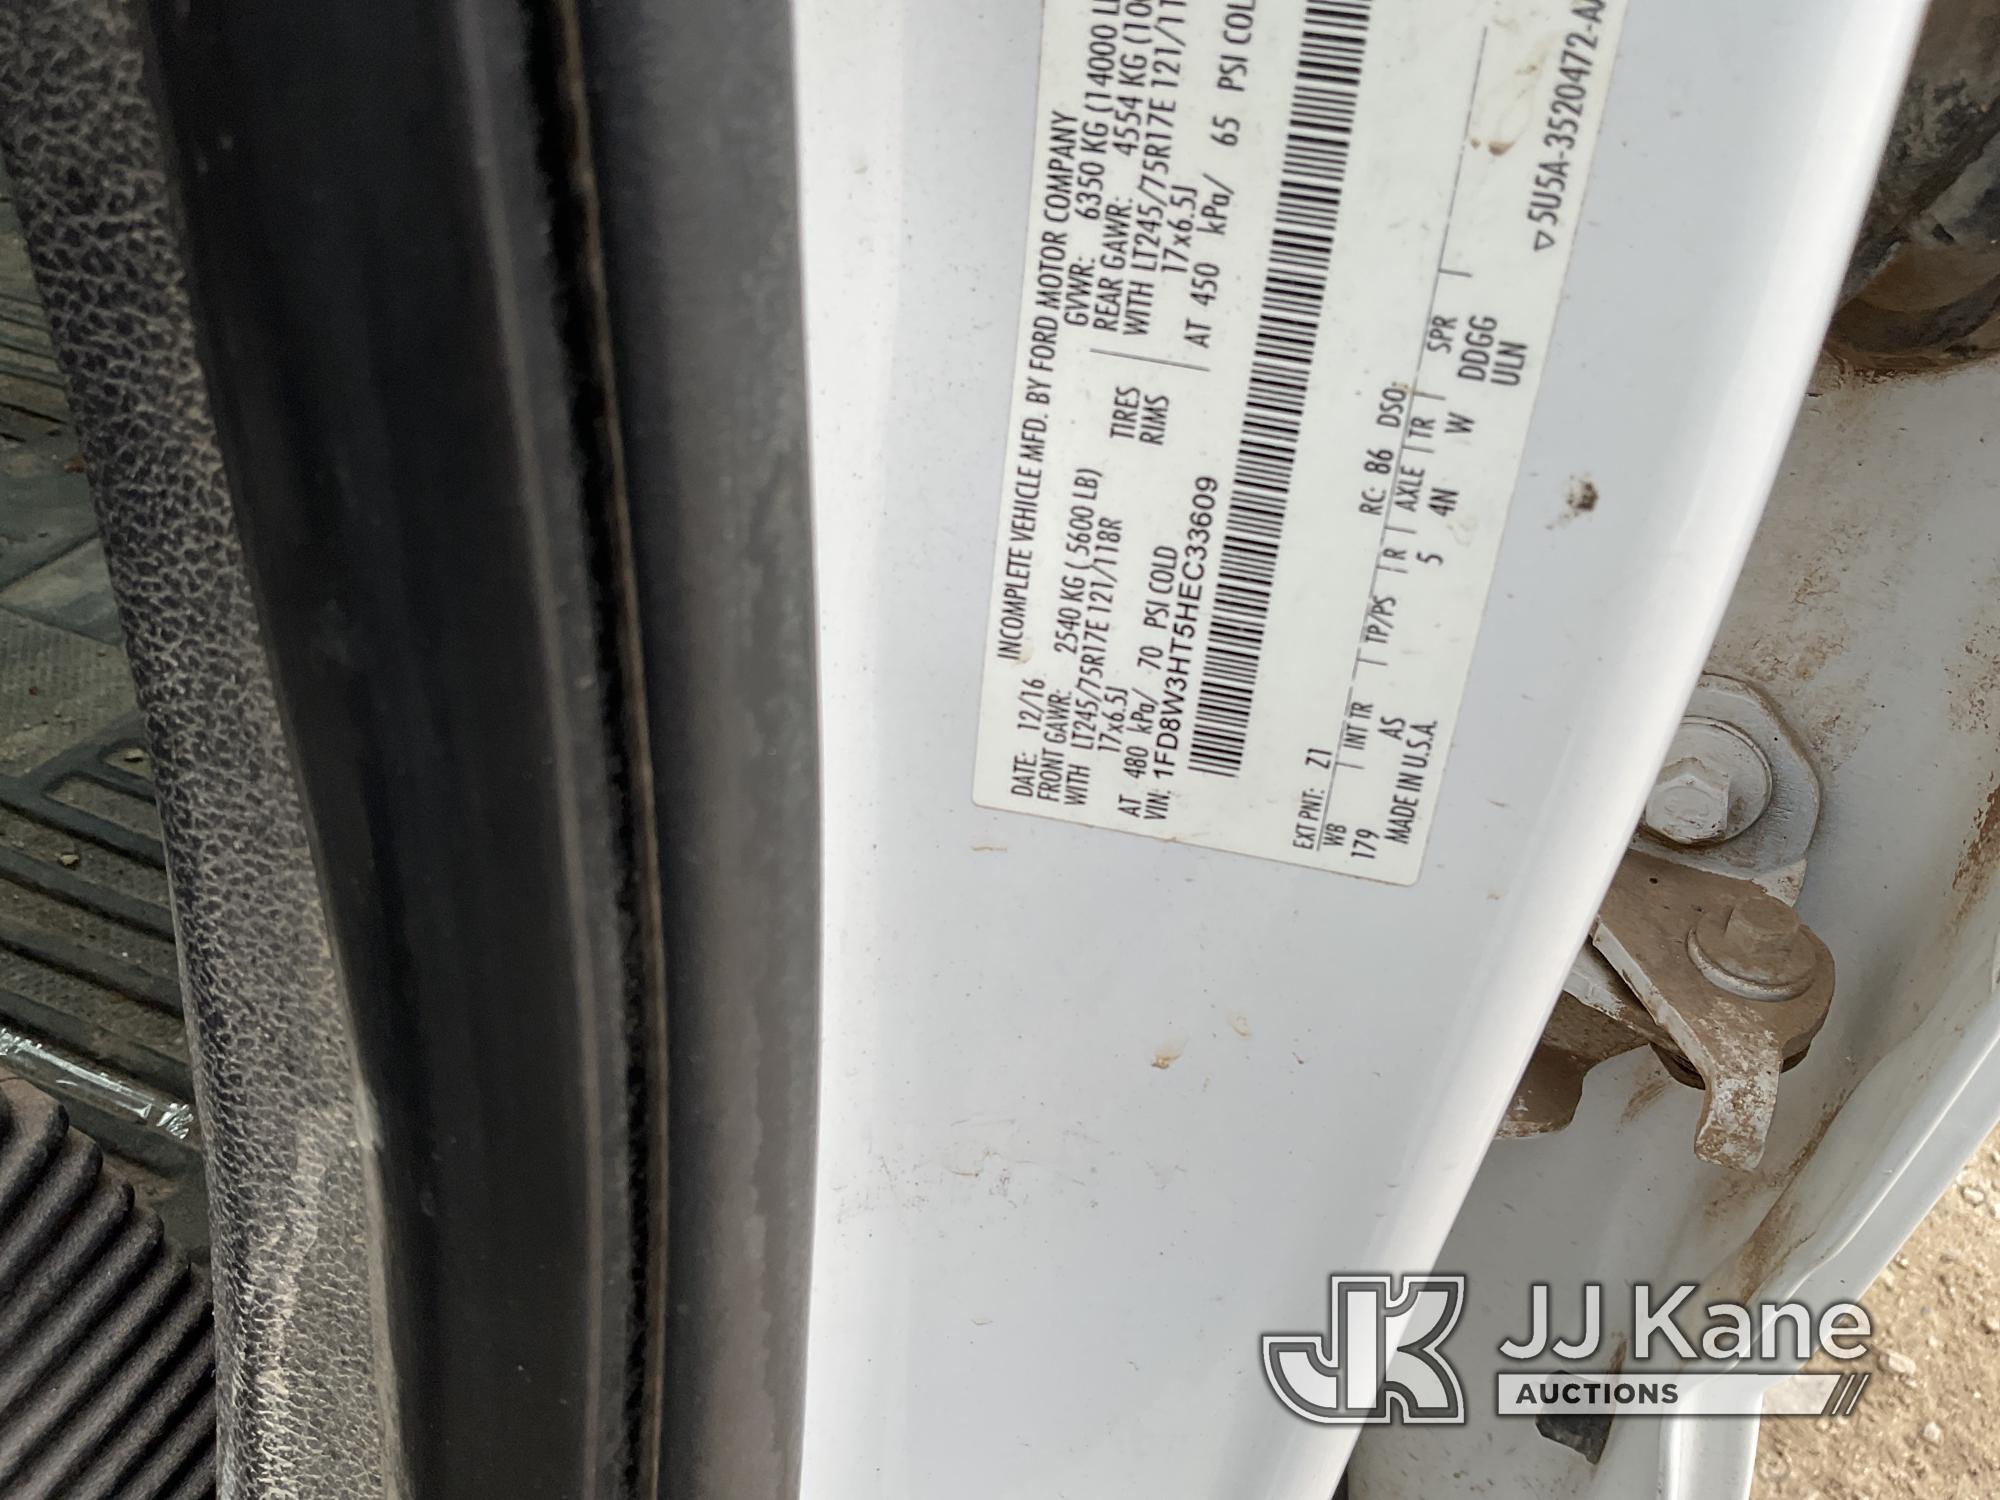 (Alvin, TX) 2017 Ford F350 4x4 Crew-Cab Flatbed/Service Truck Runs & Moves) (Check Engine Light On